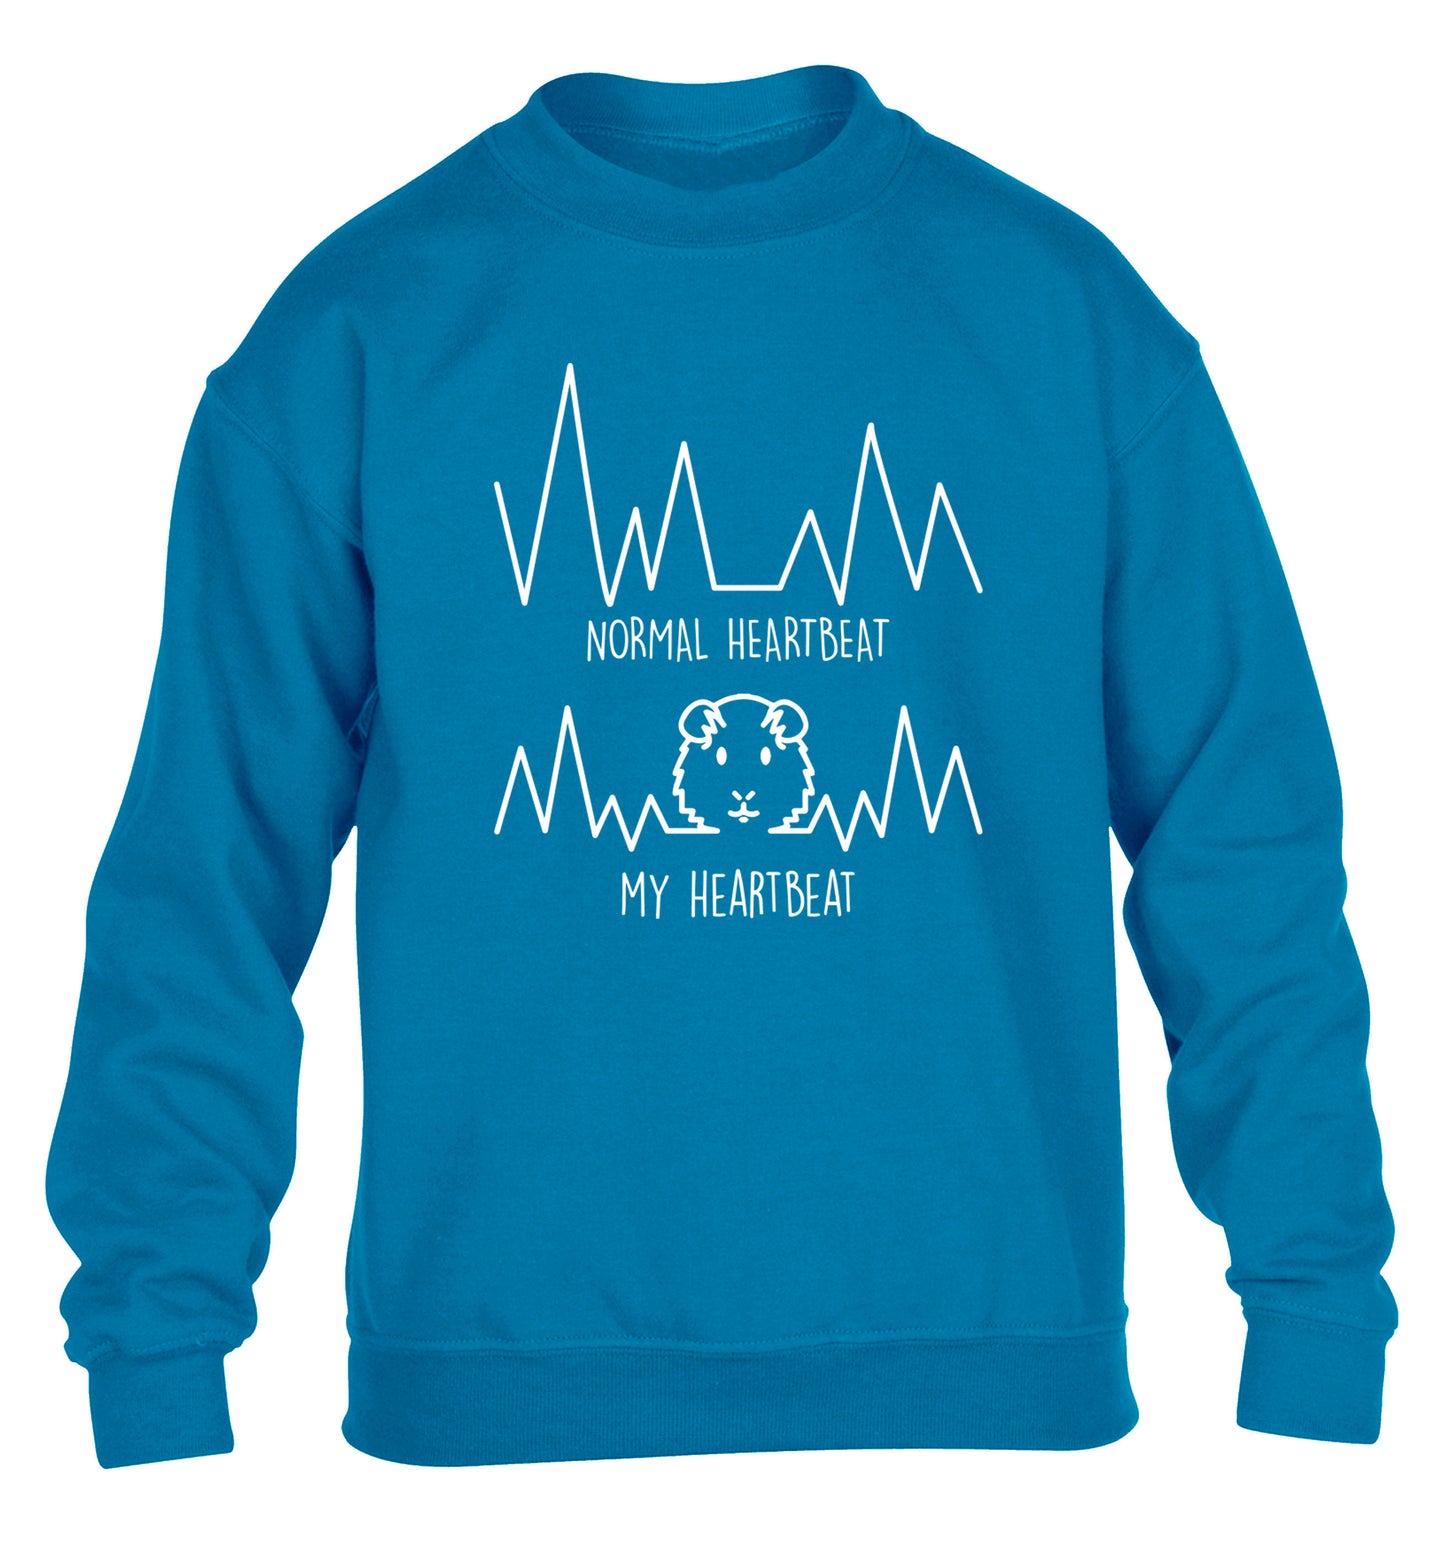 Normal heartbeat vs my heartbeat guinea pig lover children's blue  sweater 12-14 Years